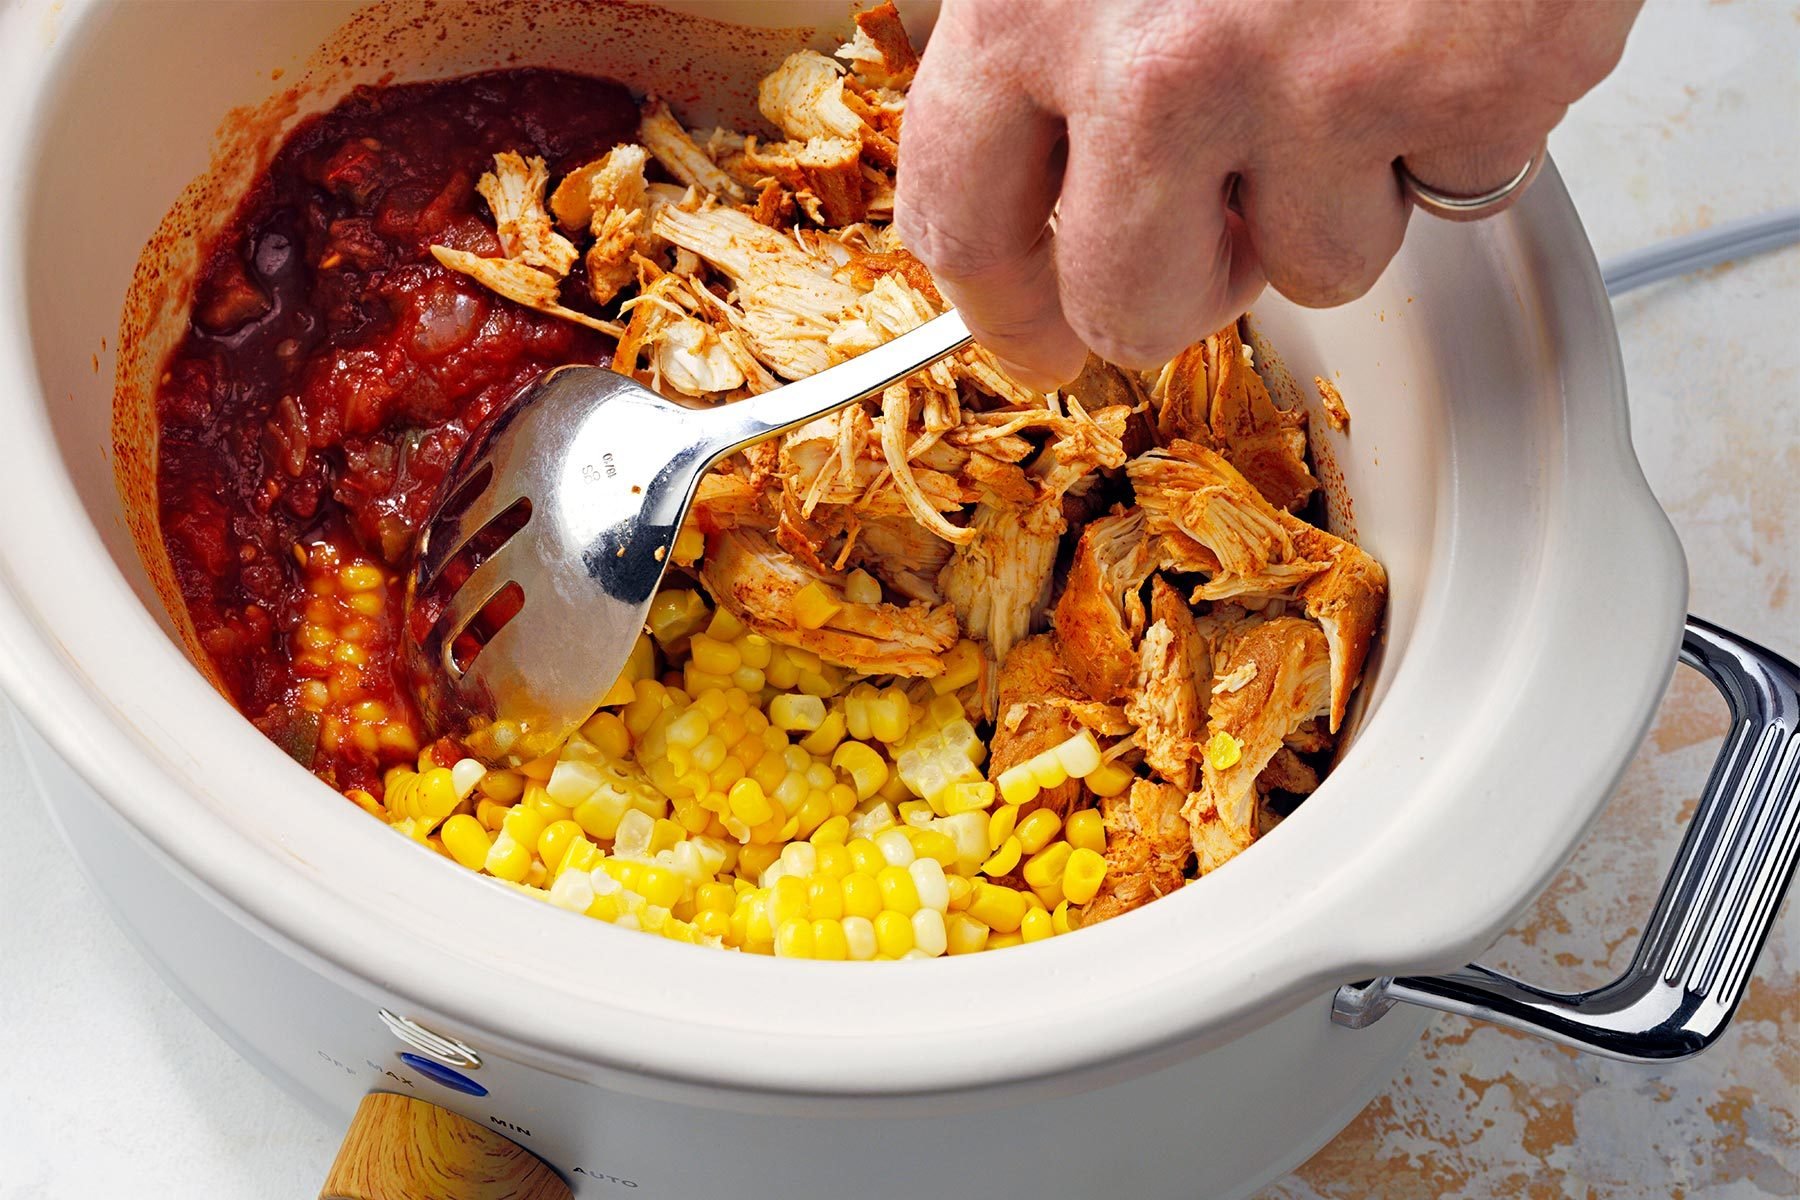 Mixing other ingredients with shredded chicken in slow cooker